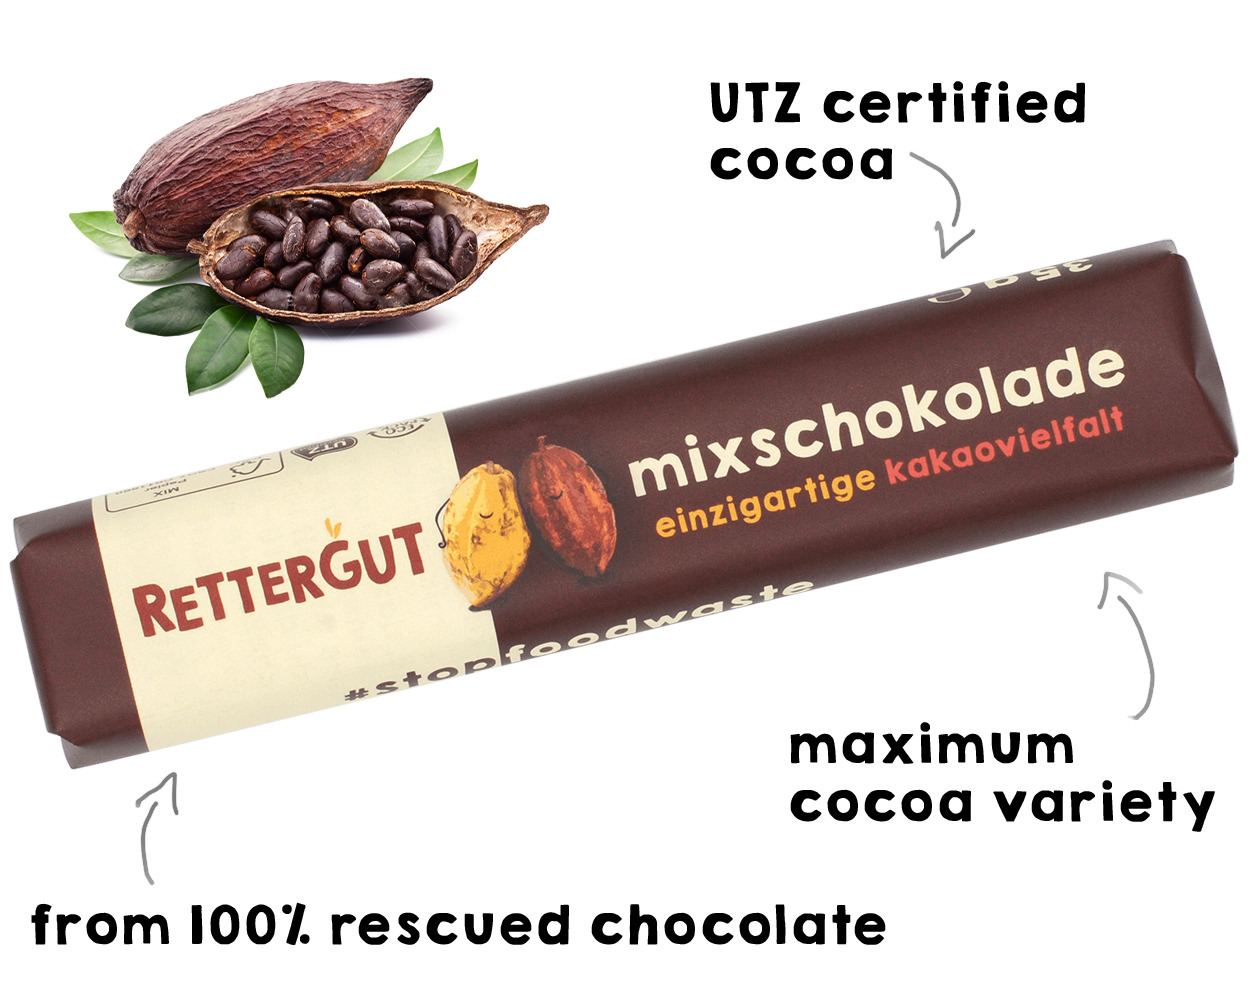 from The food rescuers - 100% rescued chocolate